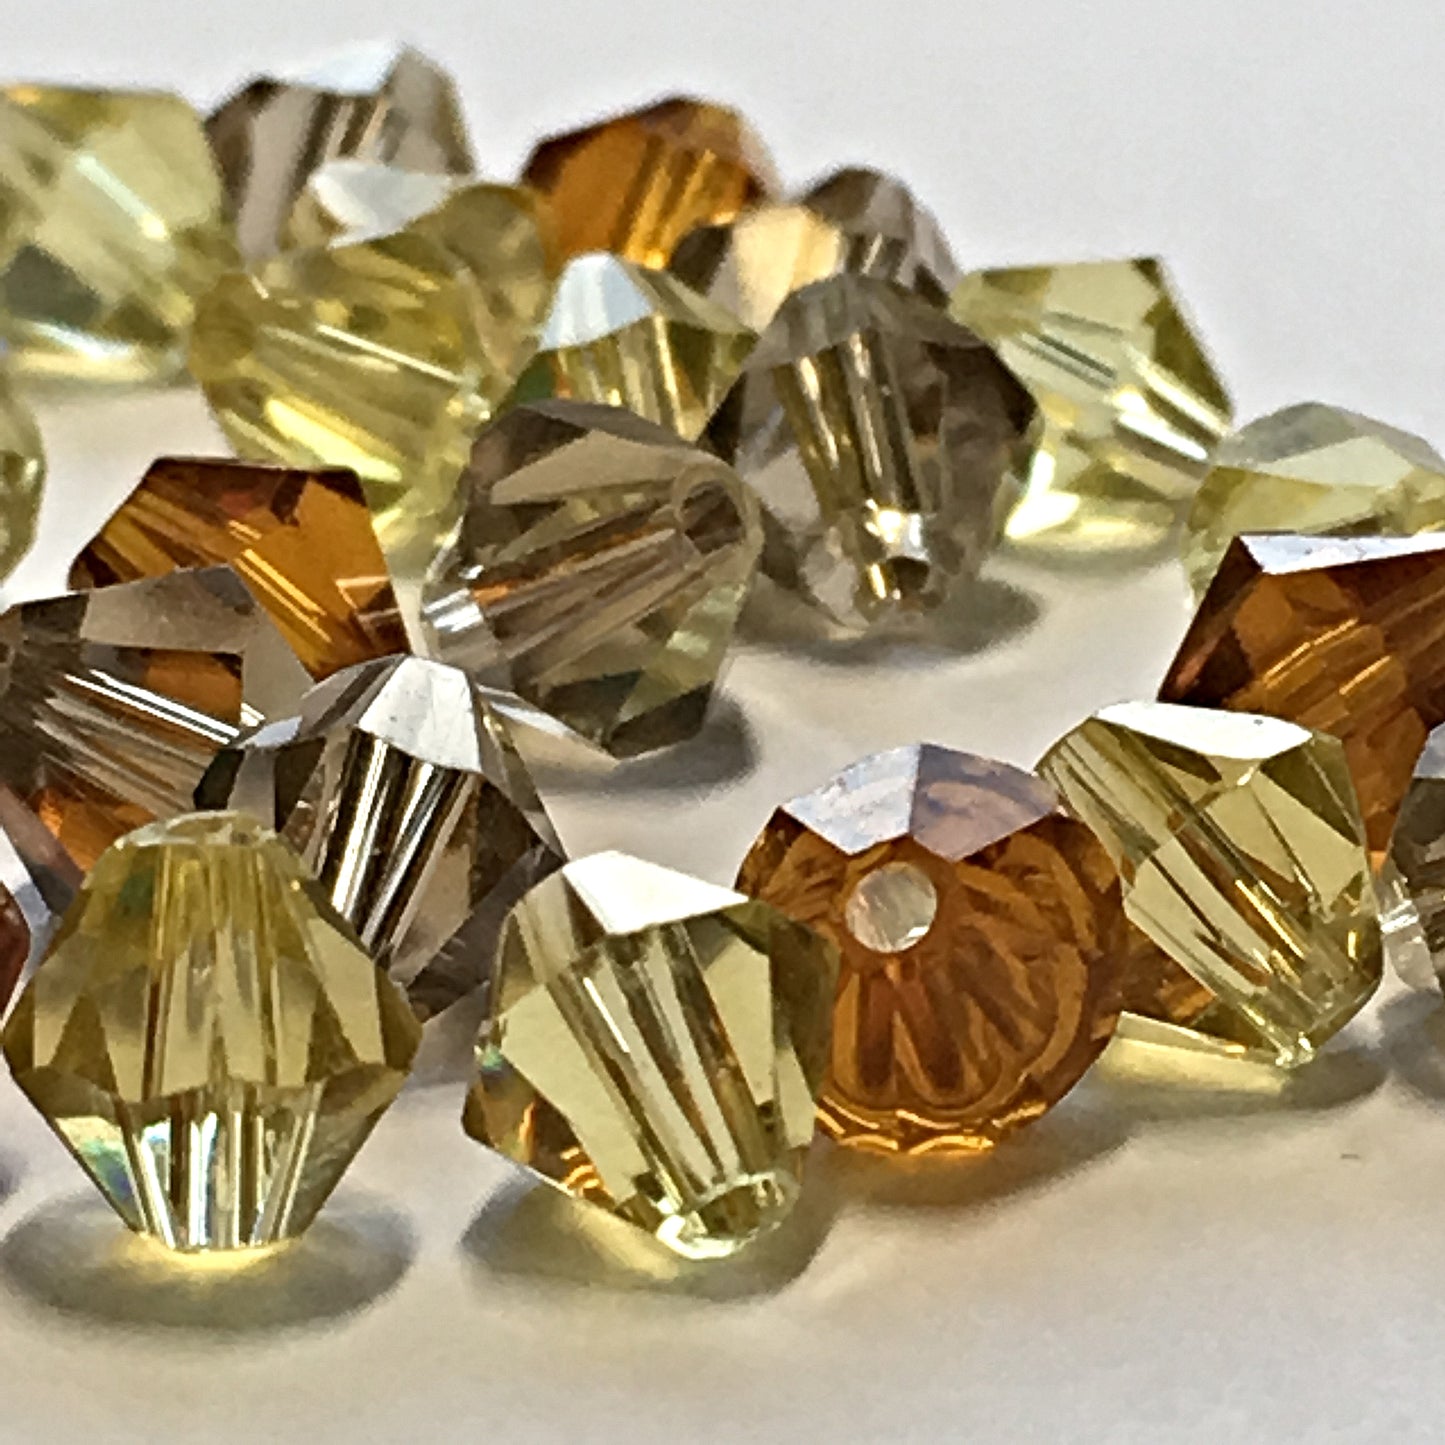 Jonquil, Topaz, Light Diamond Faceted Glass Bicone Bead Mix, 6 mm, 34 Beads